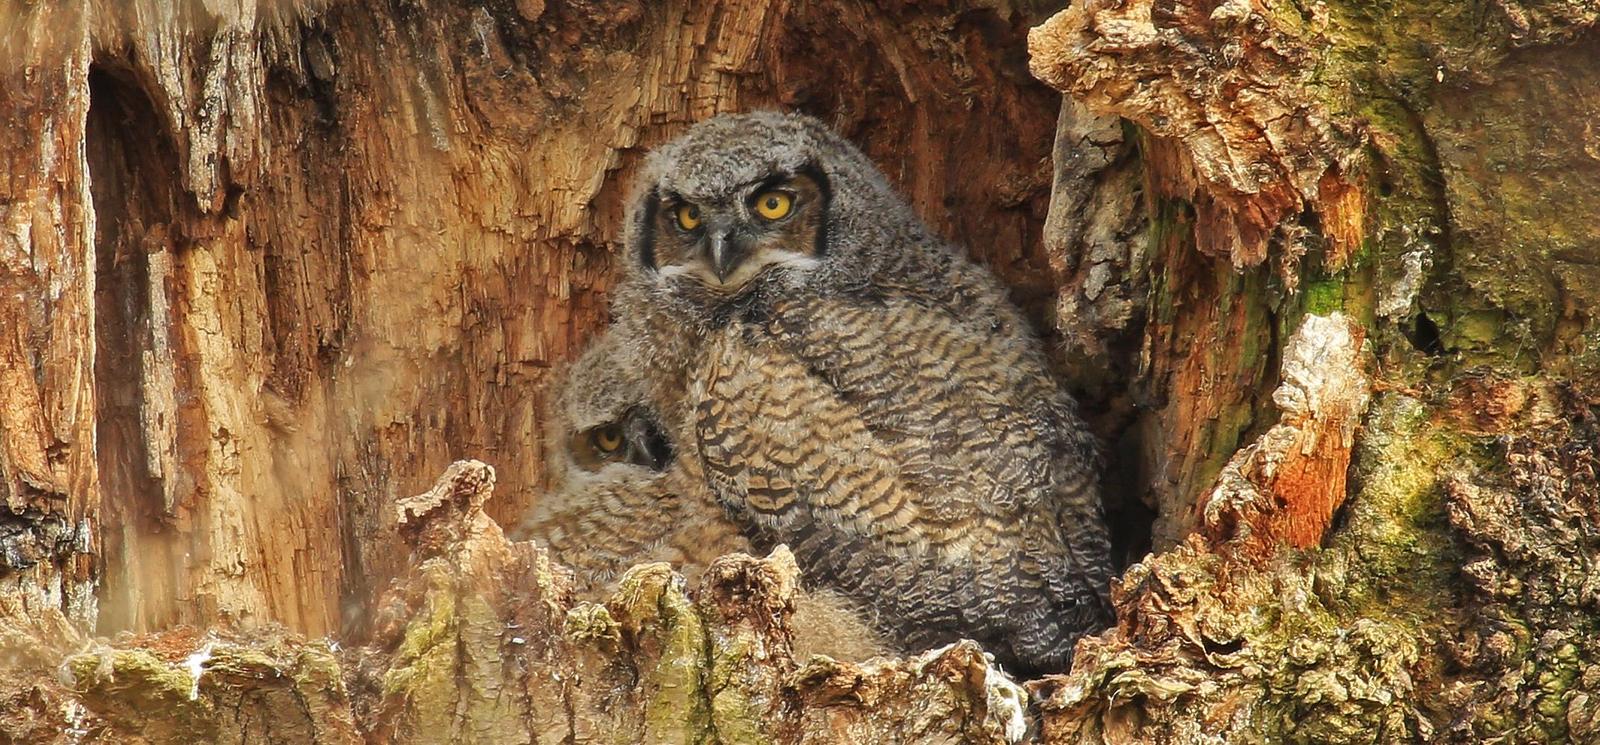 Great Horned Owl Photo by Jim  Murray